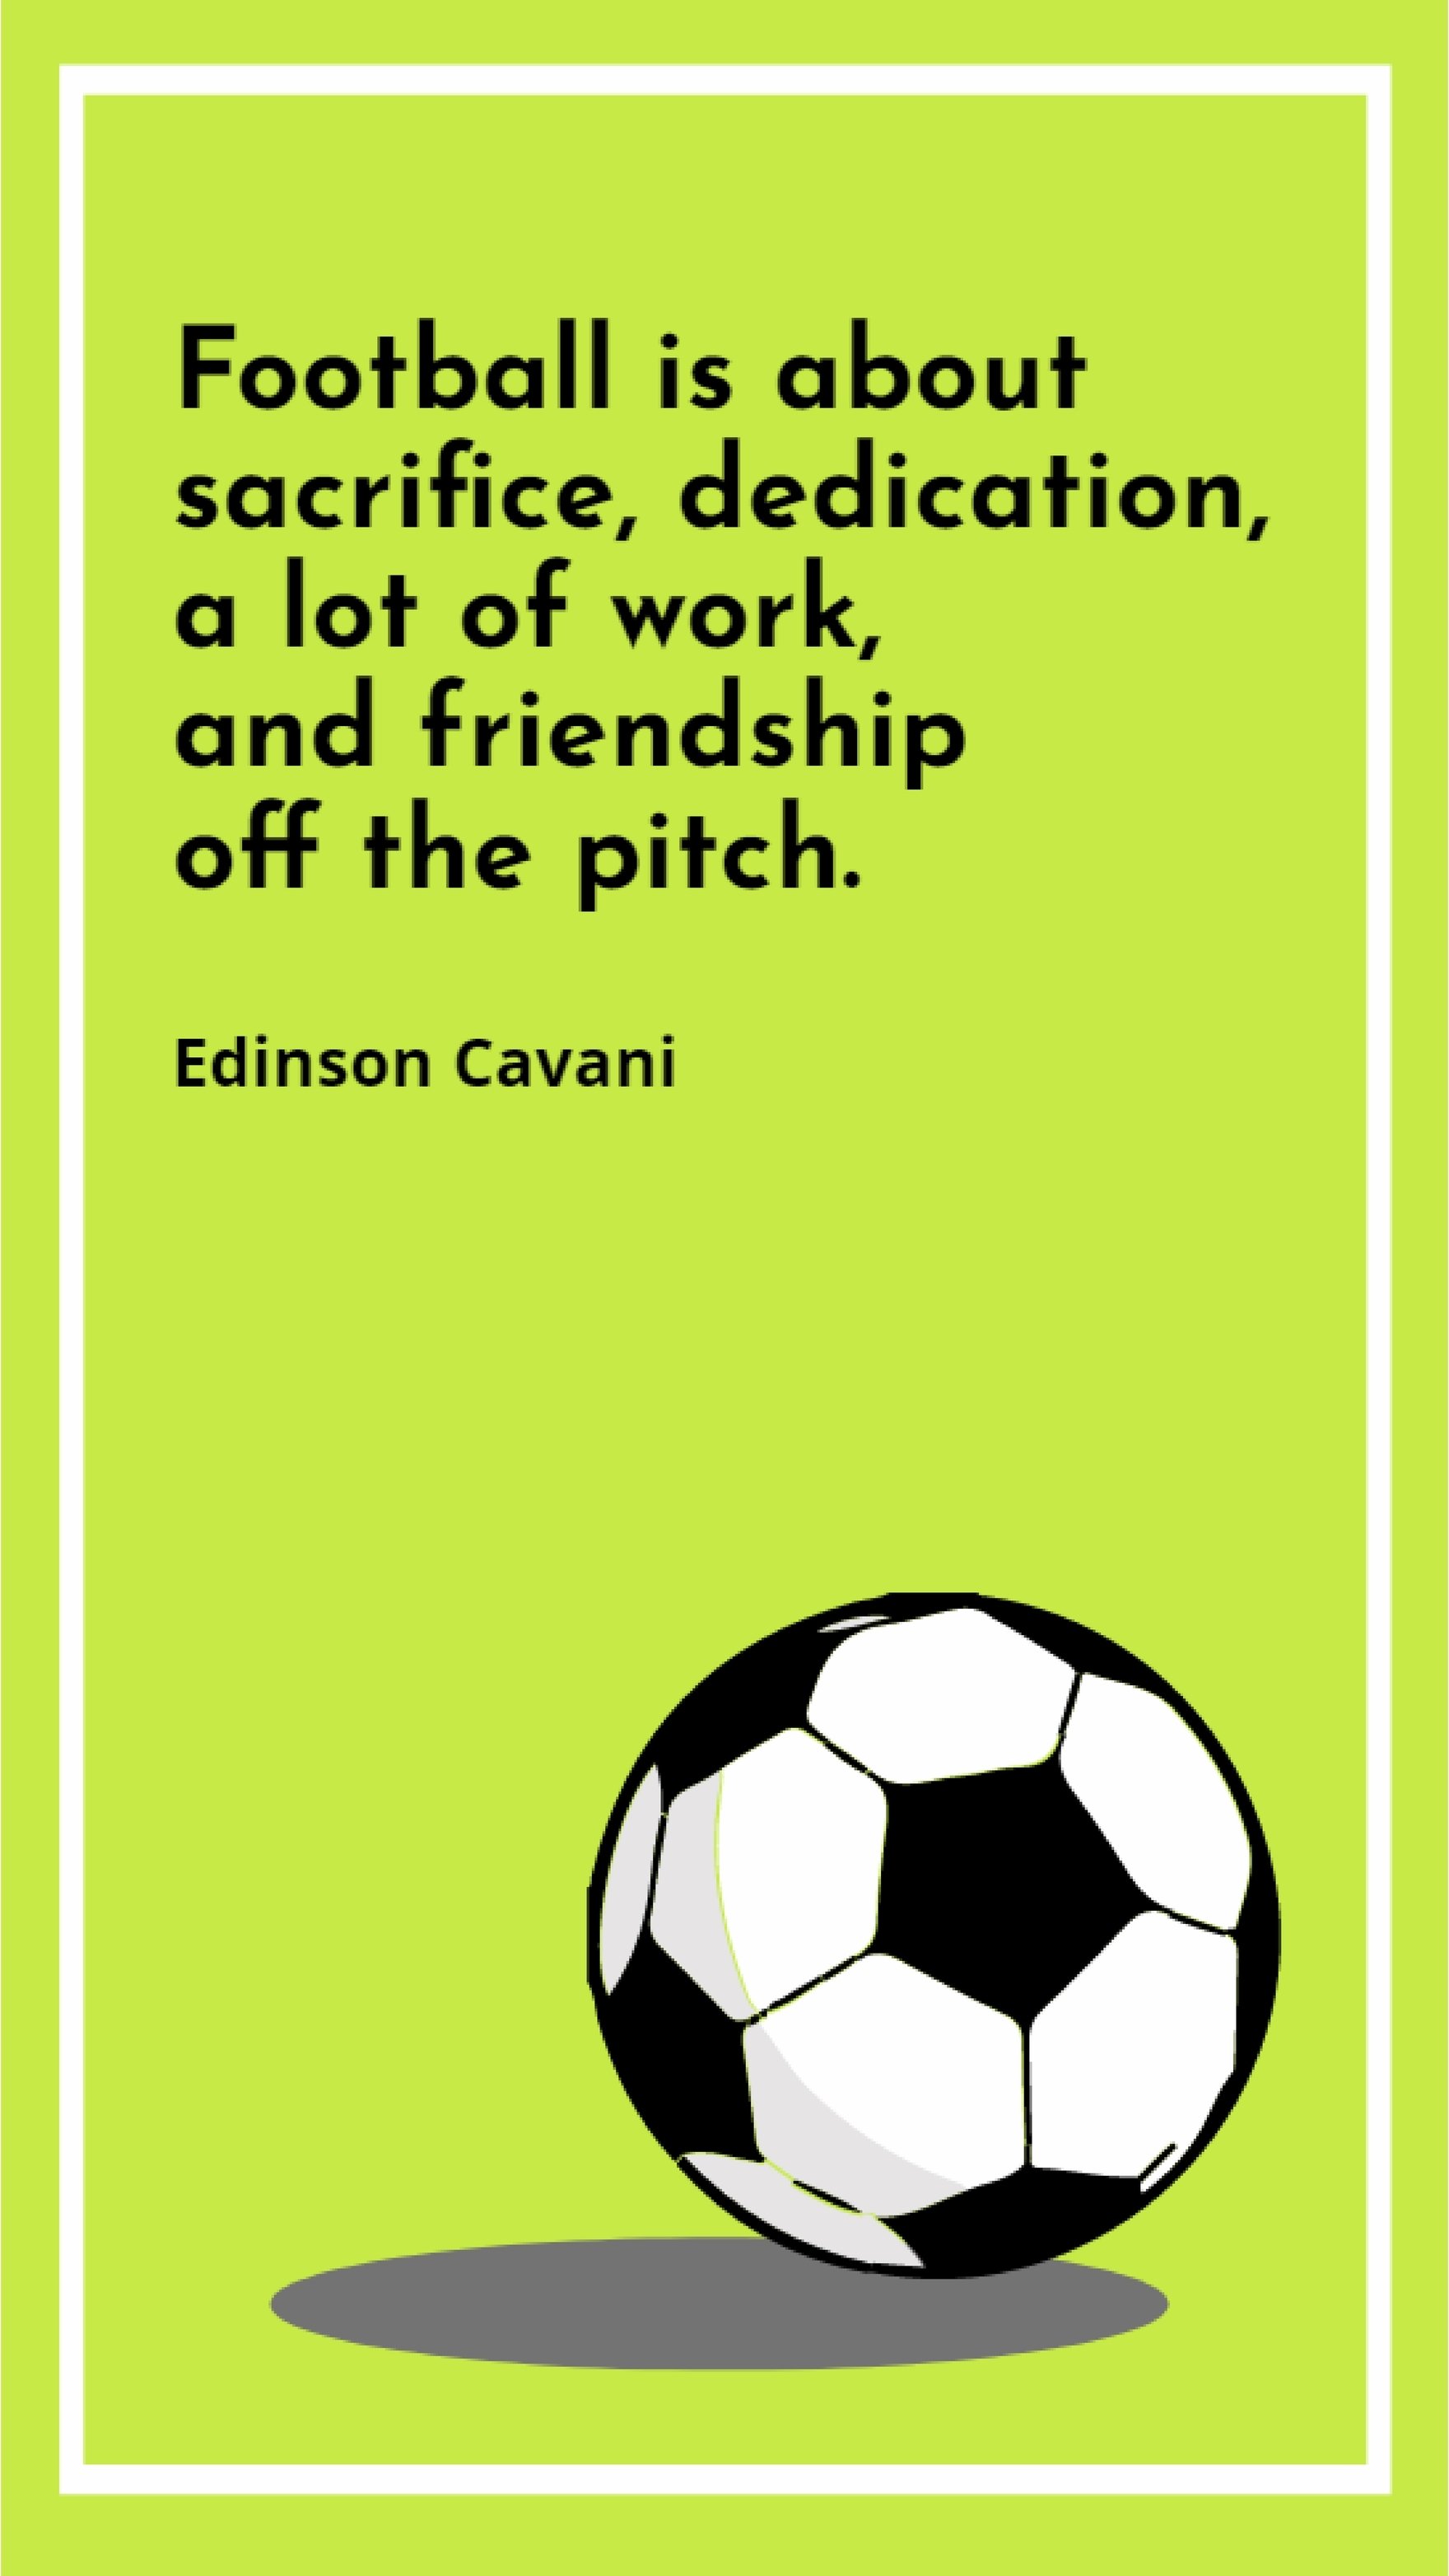 Edinson Cavani - Football is about sacrifice, dedication, a lot of work, and friendship off the pitch. Template